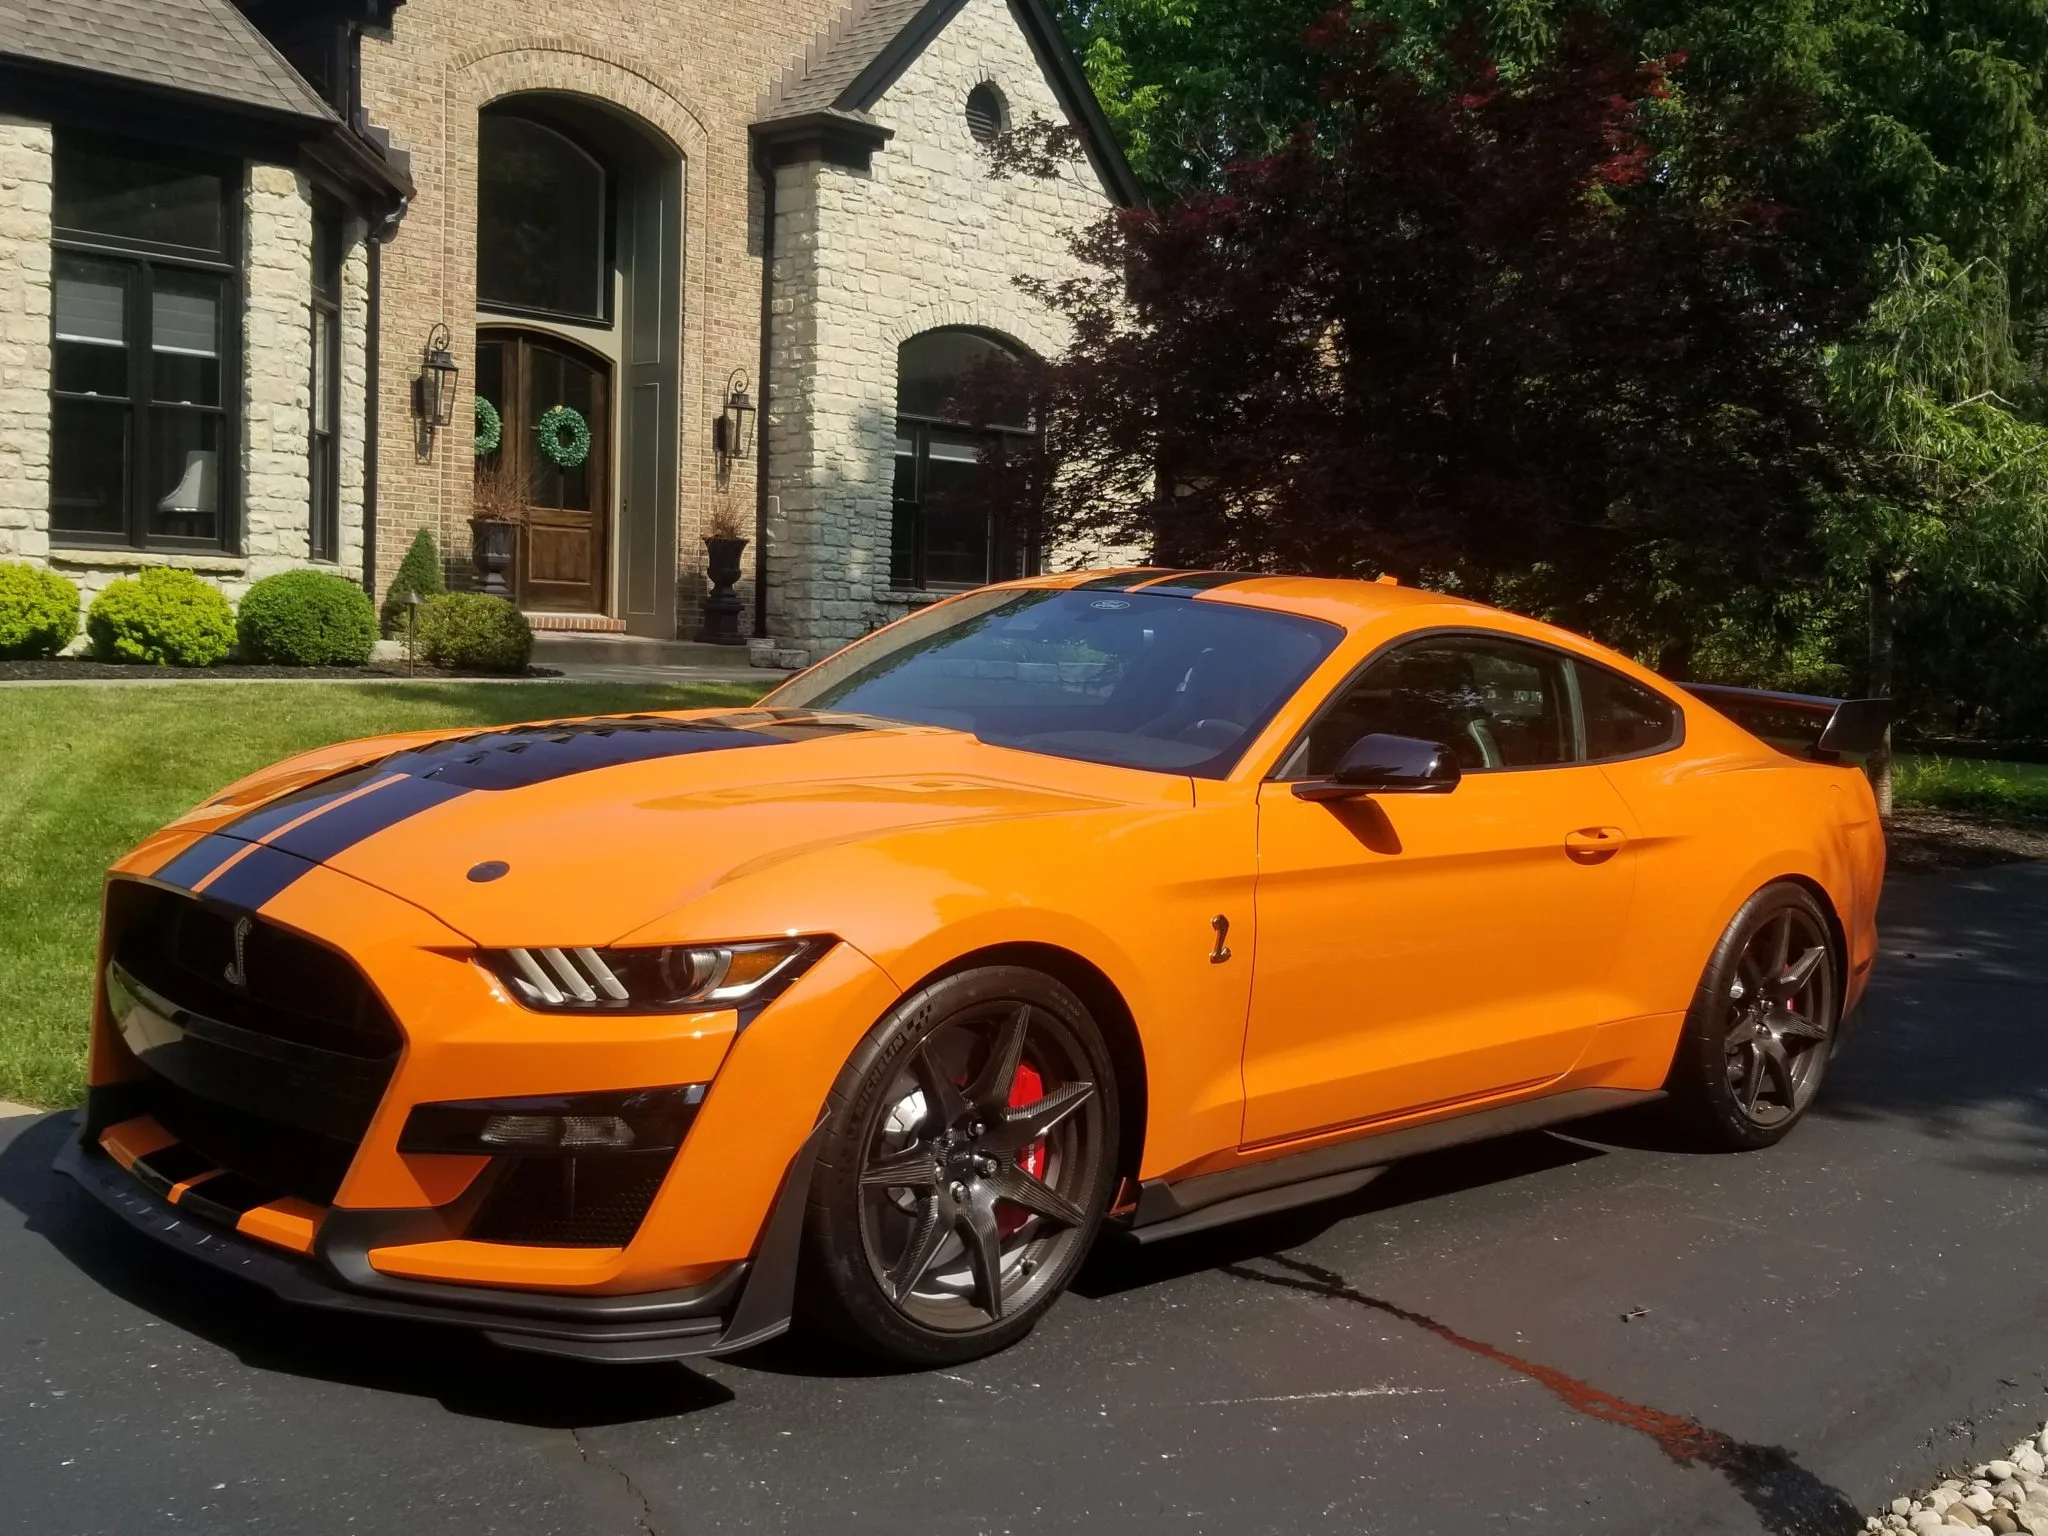 Mustang Of The Day: 2021 Ford Mustang Shelby GT500